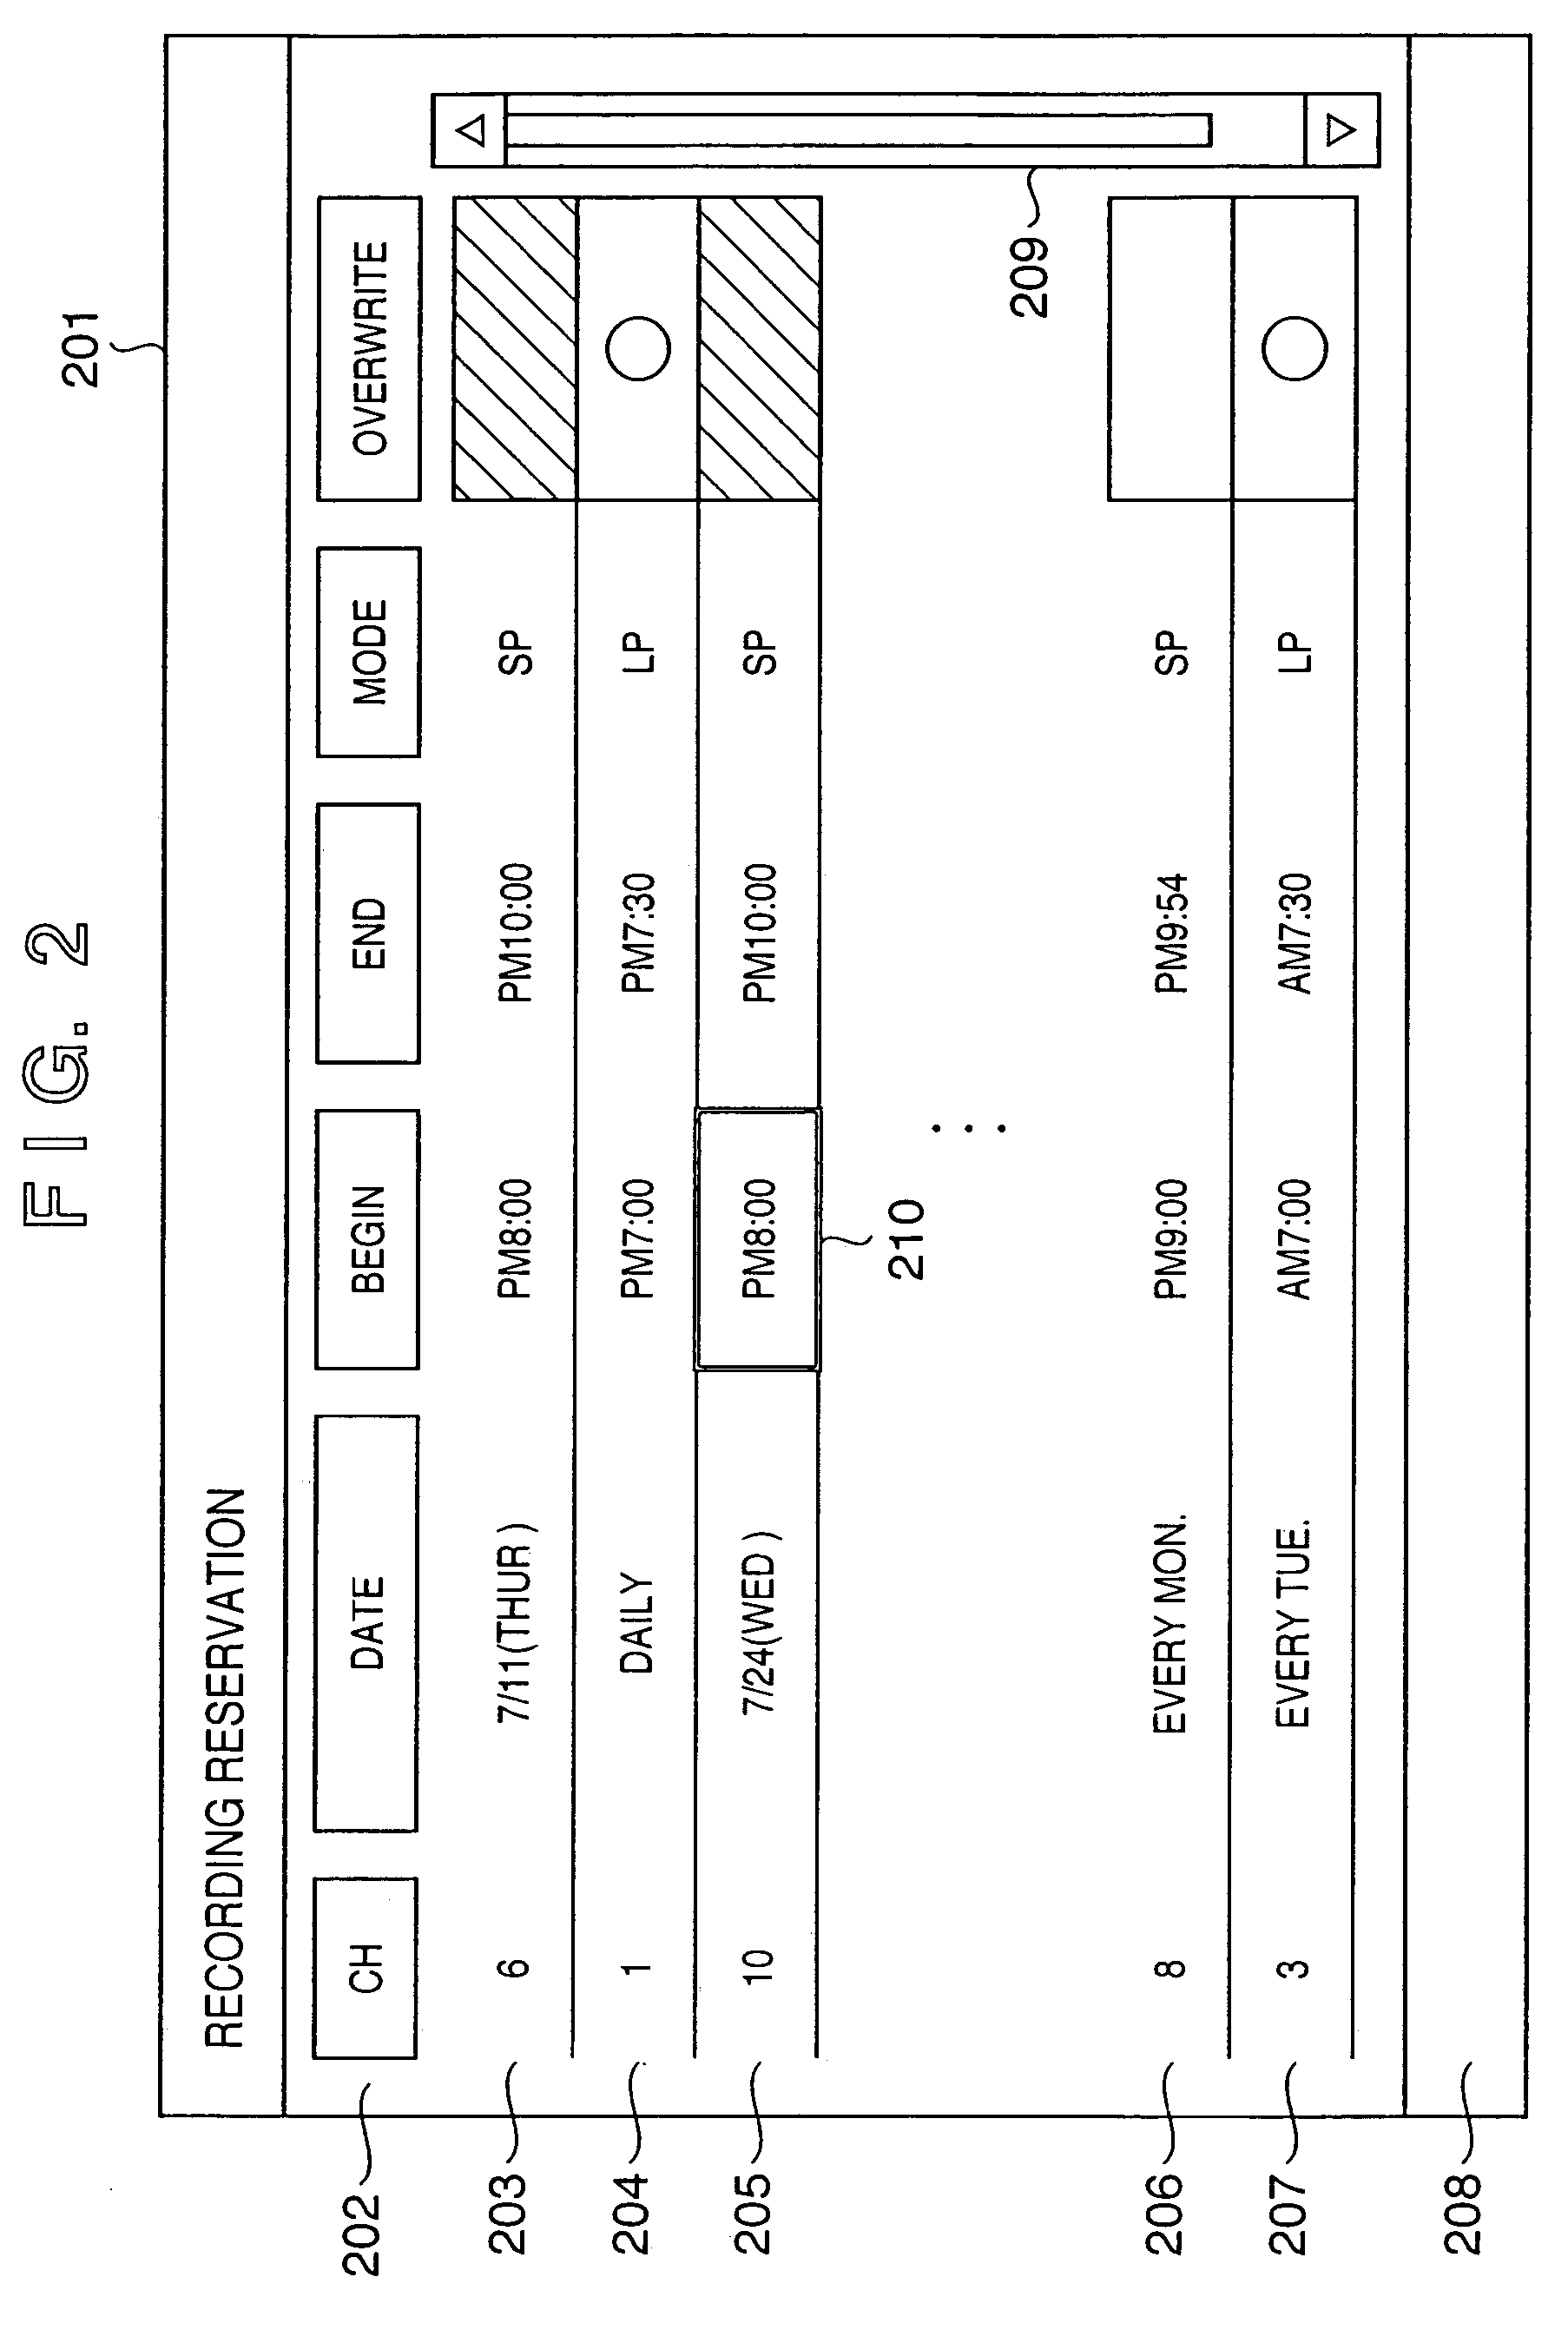 Recording apparatus with determining whether or not information signals recorded previously on recording medium in accordance with repetitive recording reservation program have already been reproduced